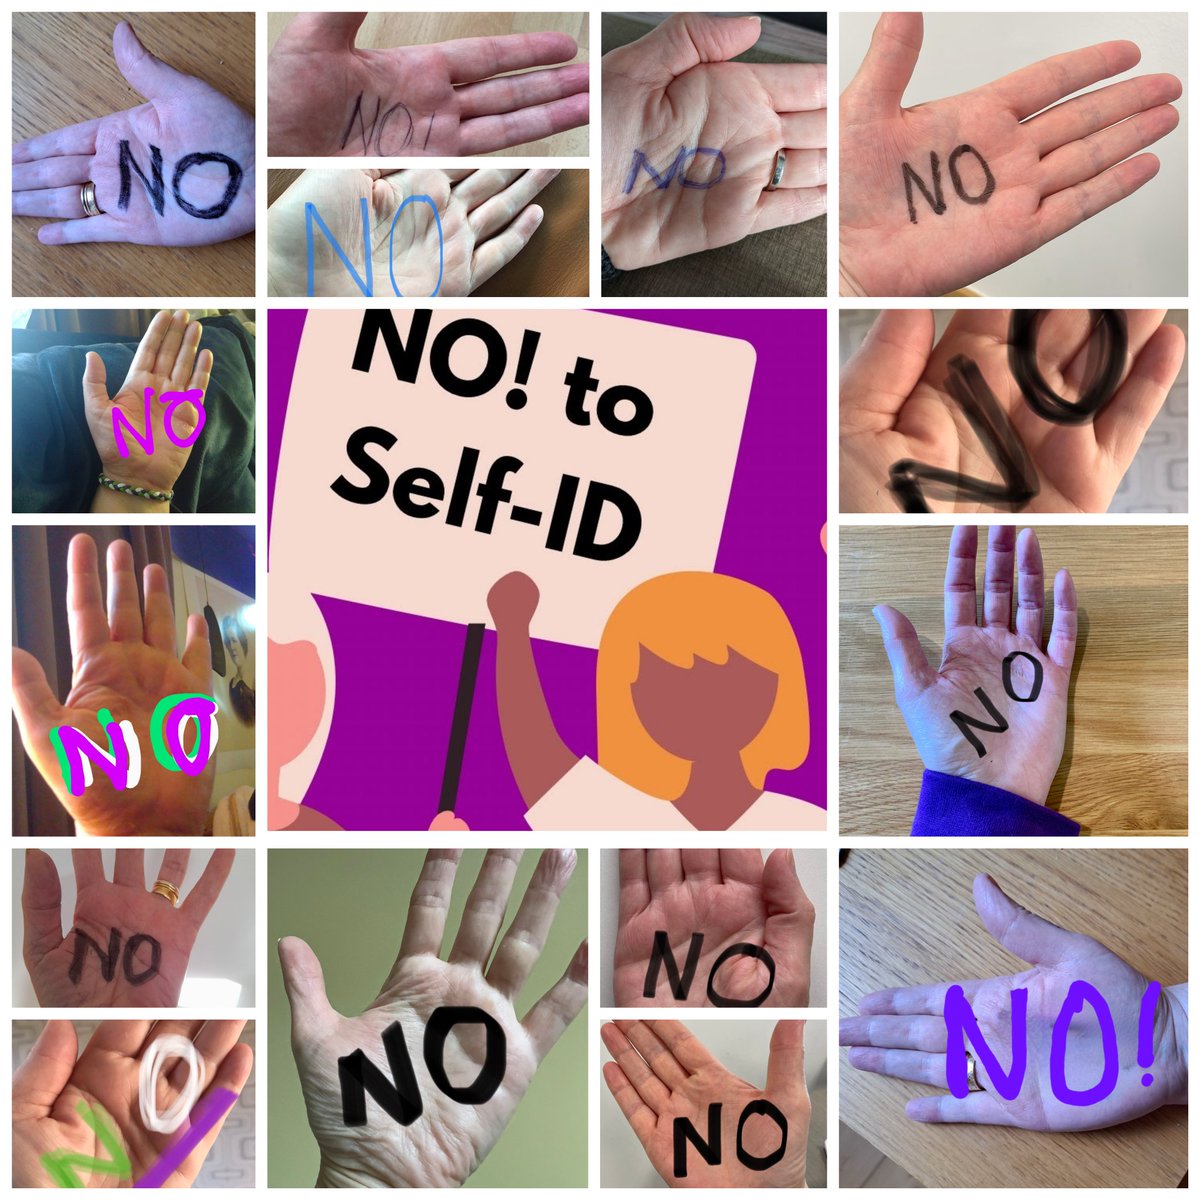 We stand in solidarity with our Scottish Sisters self ID affects us all. Self ID will enable predators to take advantage of women and children. We say NO!#ThisIsMyNo #NoToSelfID #NoMenInWomensSpaces #WomenWontWheesht